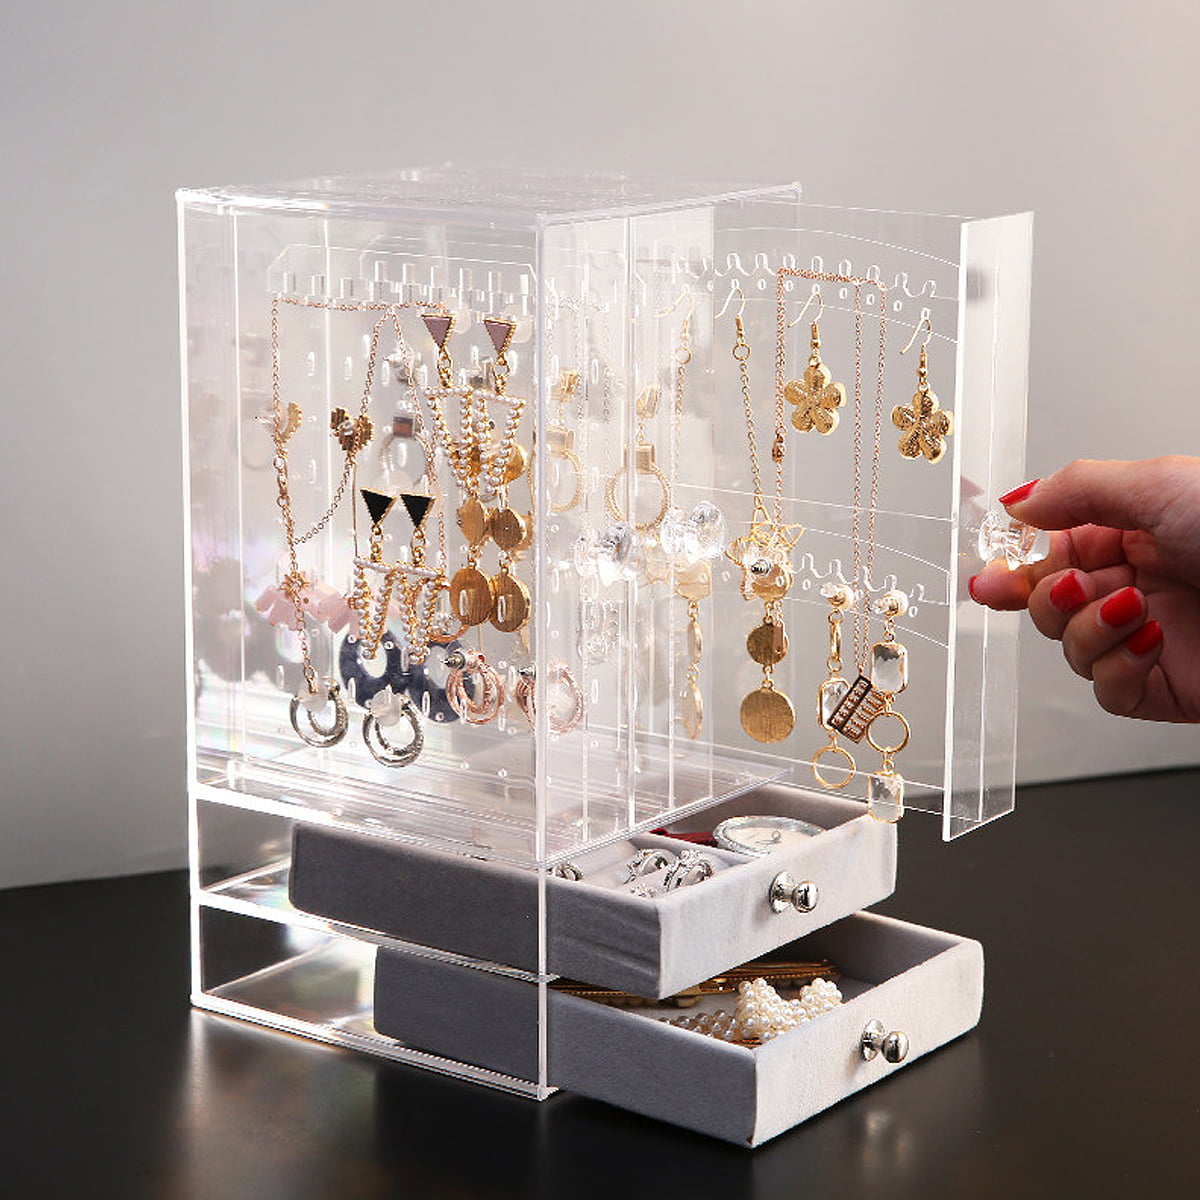 Details about   Acrylic Display Stand Model Jewelry Organizer Holder Shelf Show Rack Removable 